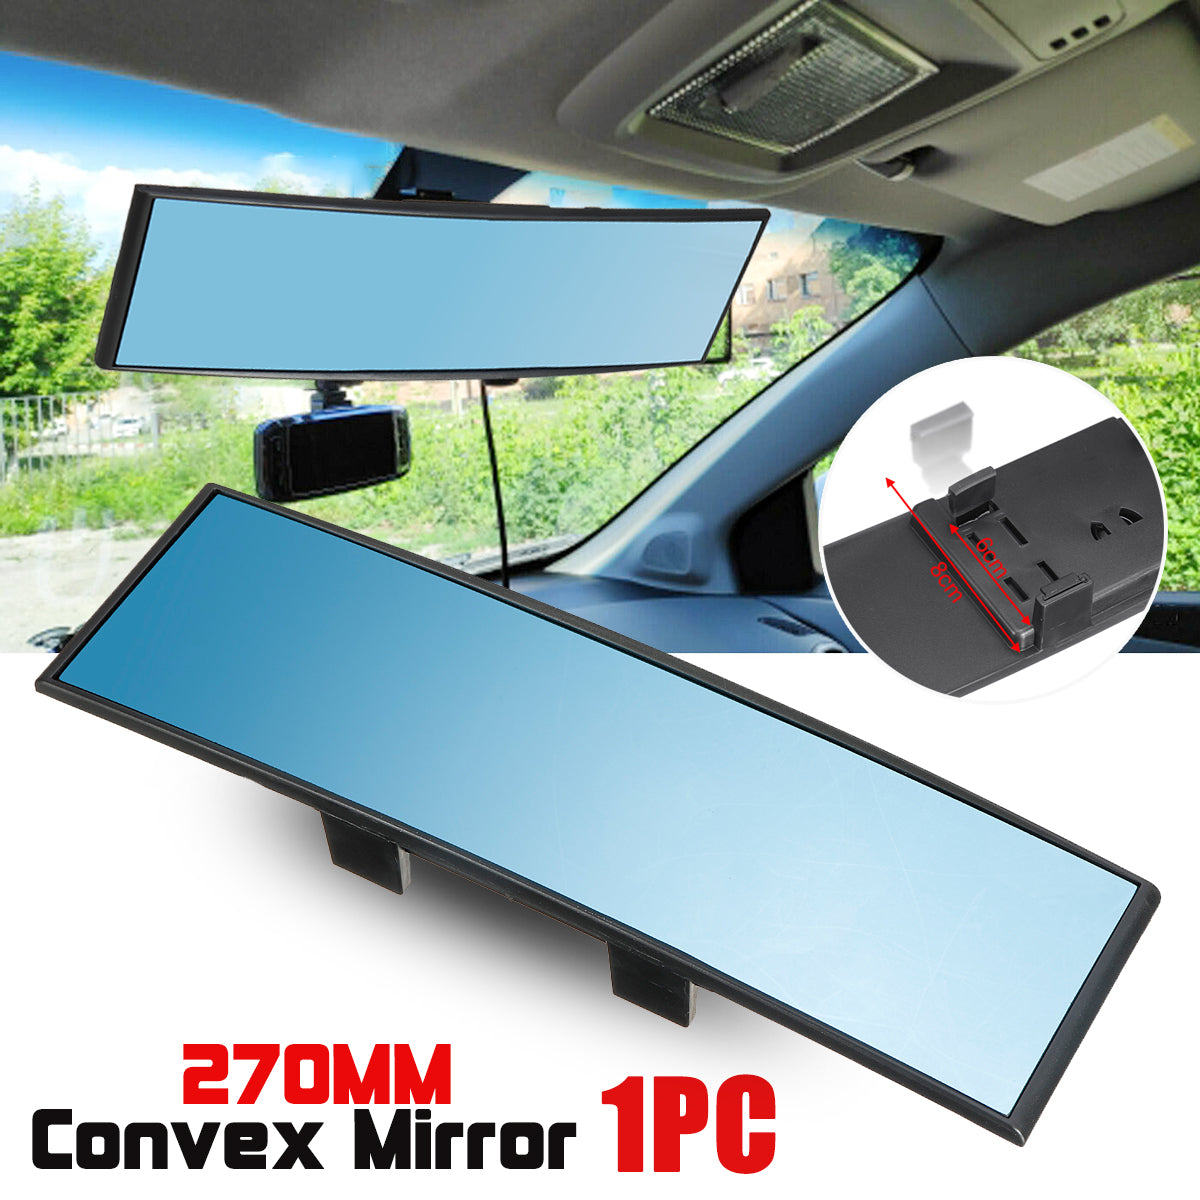 Sky Blue Car Interior Panoramic 270mm Convex Rear View Rearview Mirror Universal Clip On